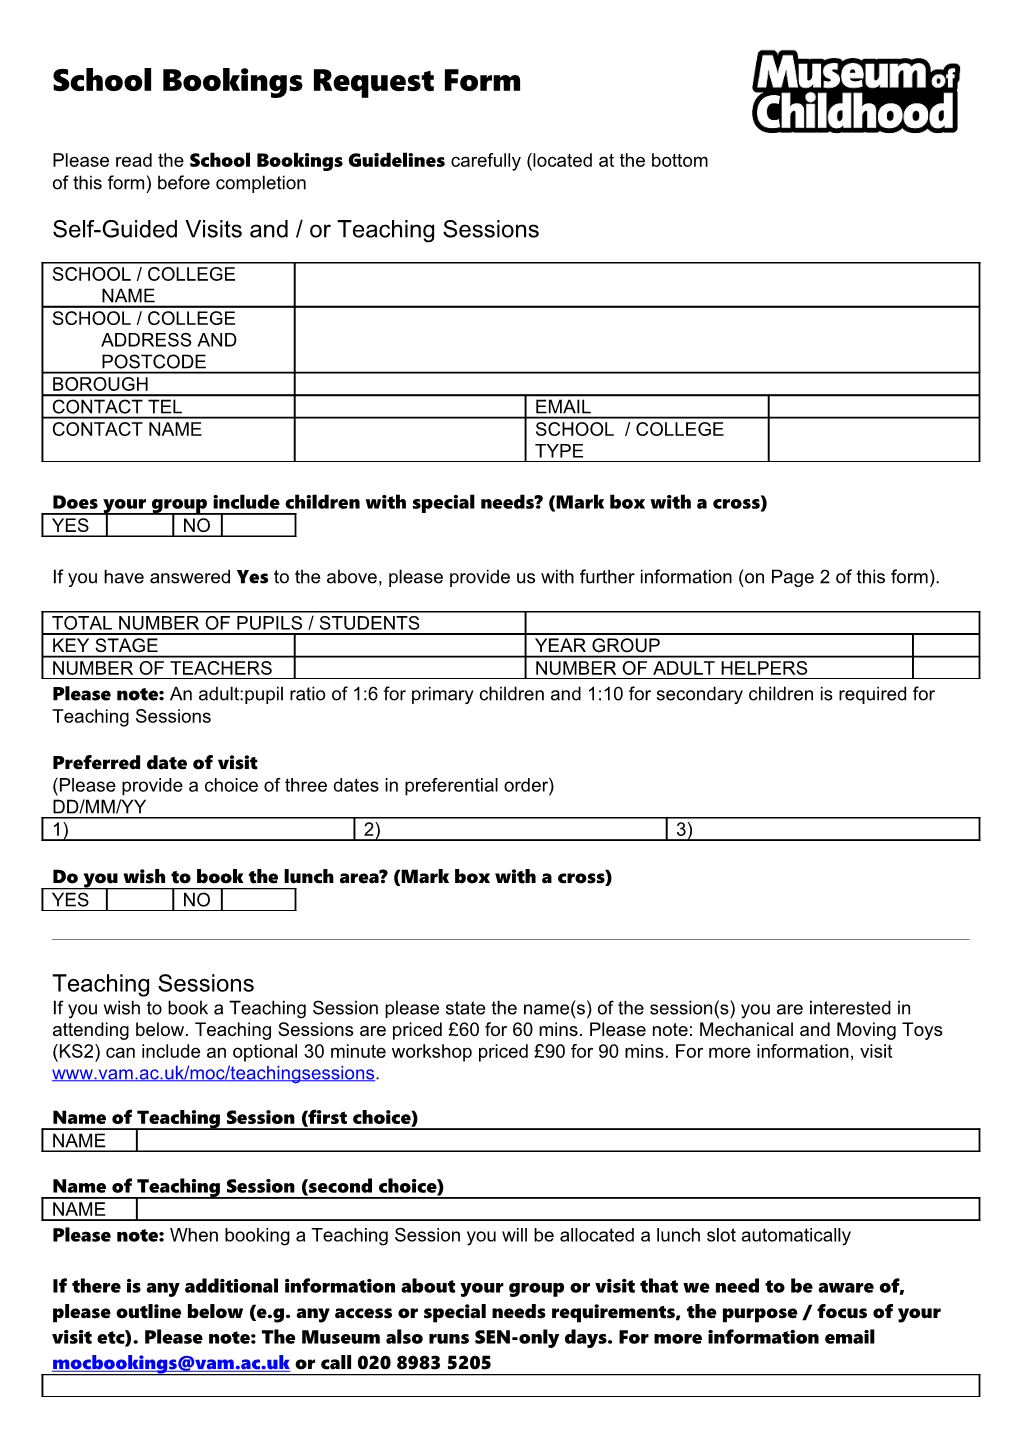 School Bookings Request Form